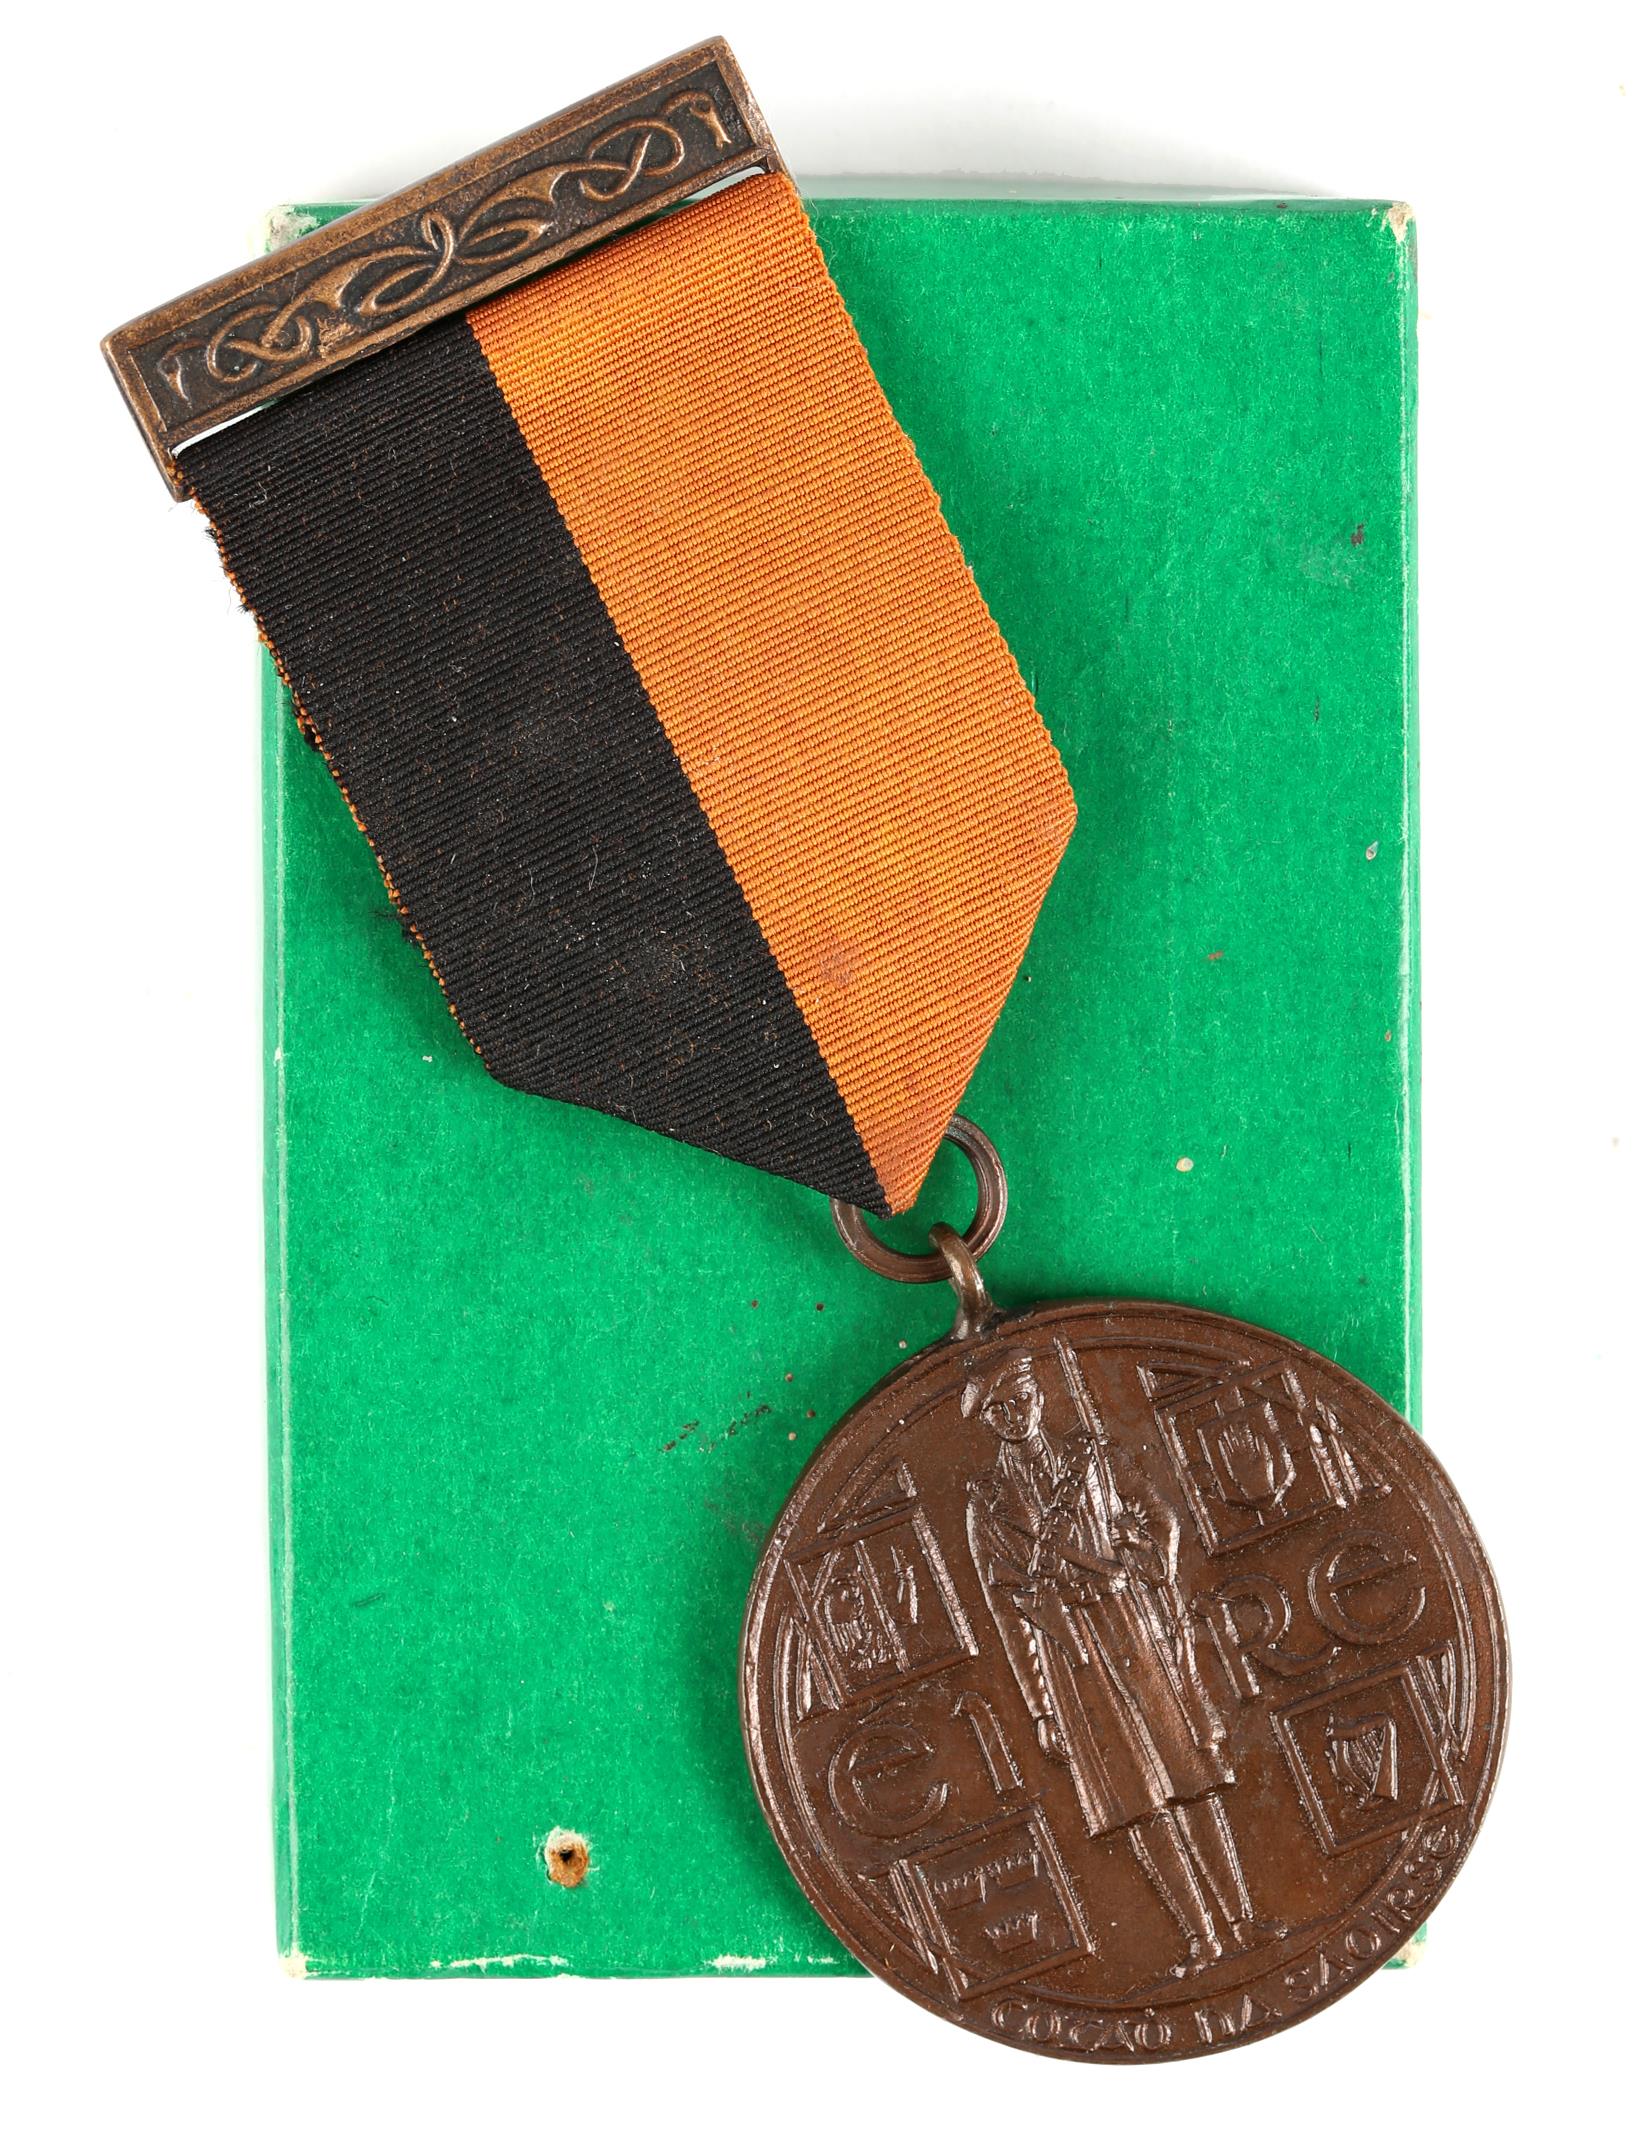 1917-21 War of Independence Service medal, awarded posthumously and officially named to Captain